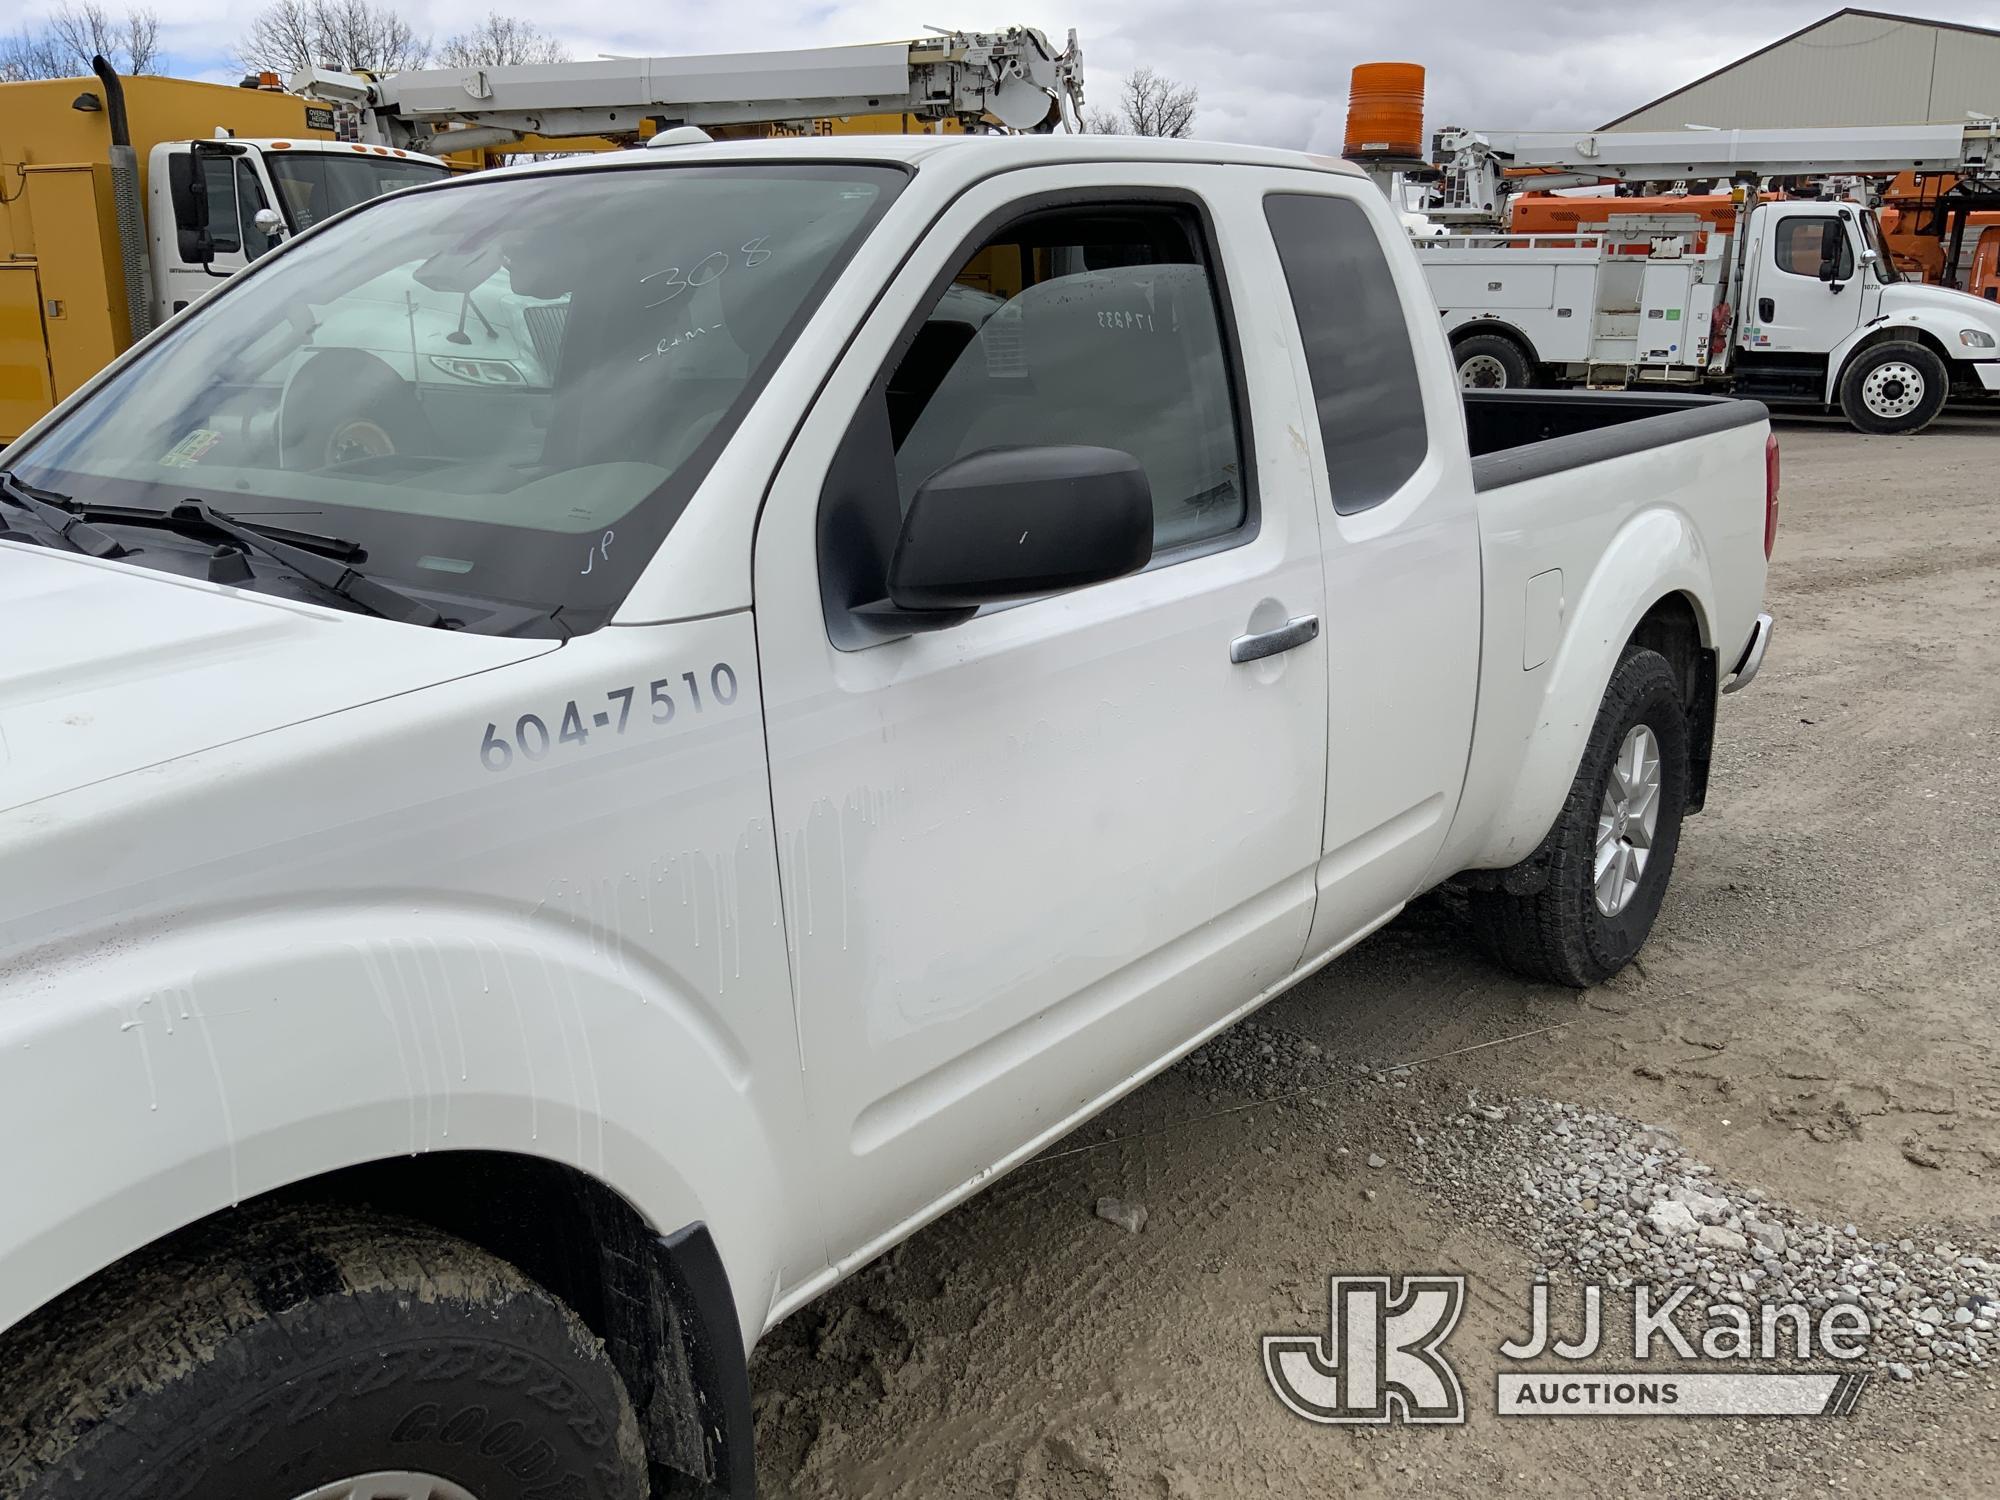 (Fort Wayne, IN) 2017 Nissan Frontier 4x4 Extended-Cab Pickup Truck Runs & Moves) (Paint Damage